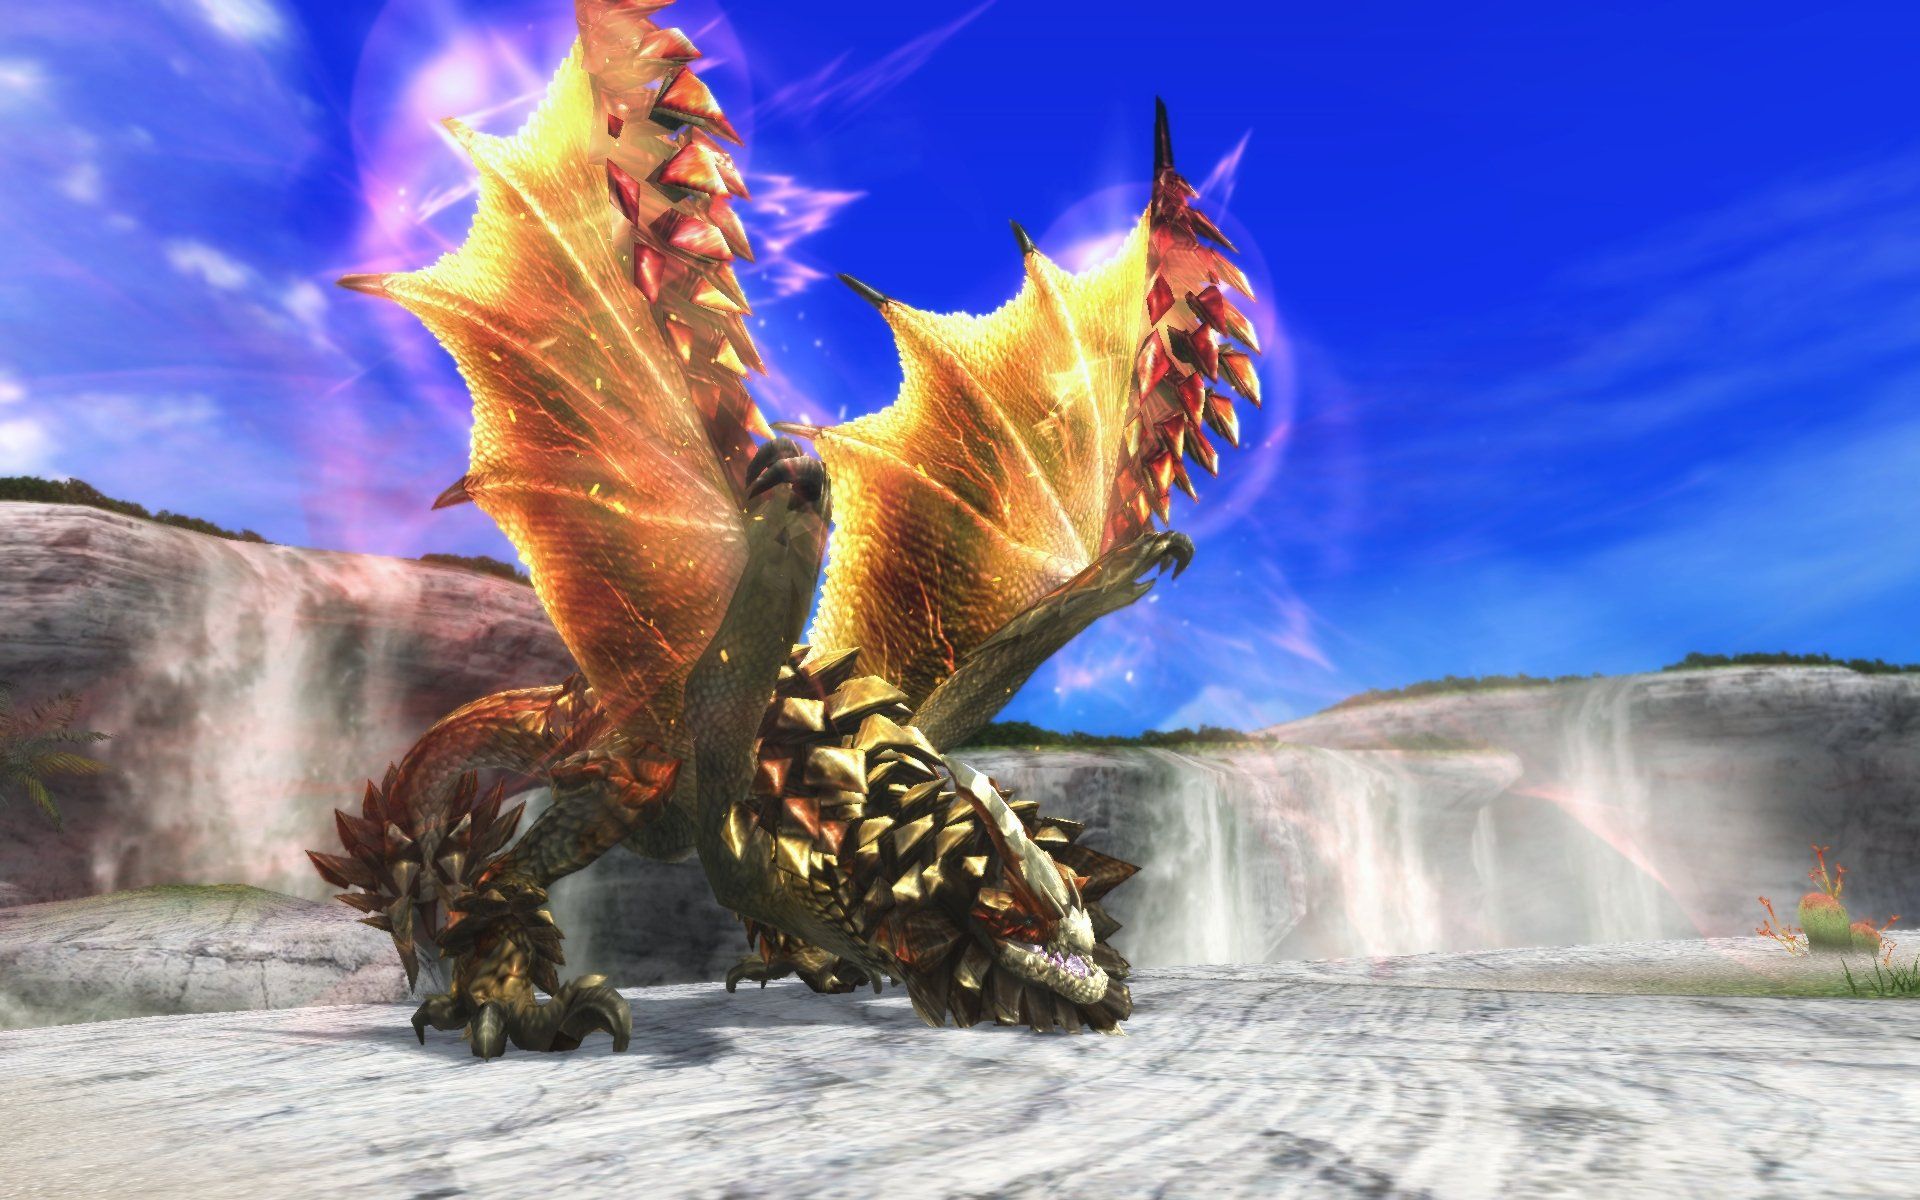 BannedLagiacrus have been Seregios reports in Mezeporta recently. When enraged, their wings will glow red, unlike the ones seen in other Guild districts, and hunters can counter their attacks